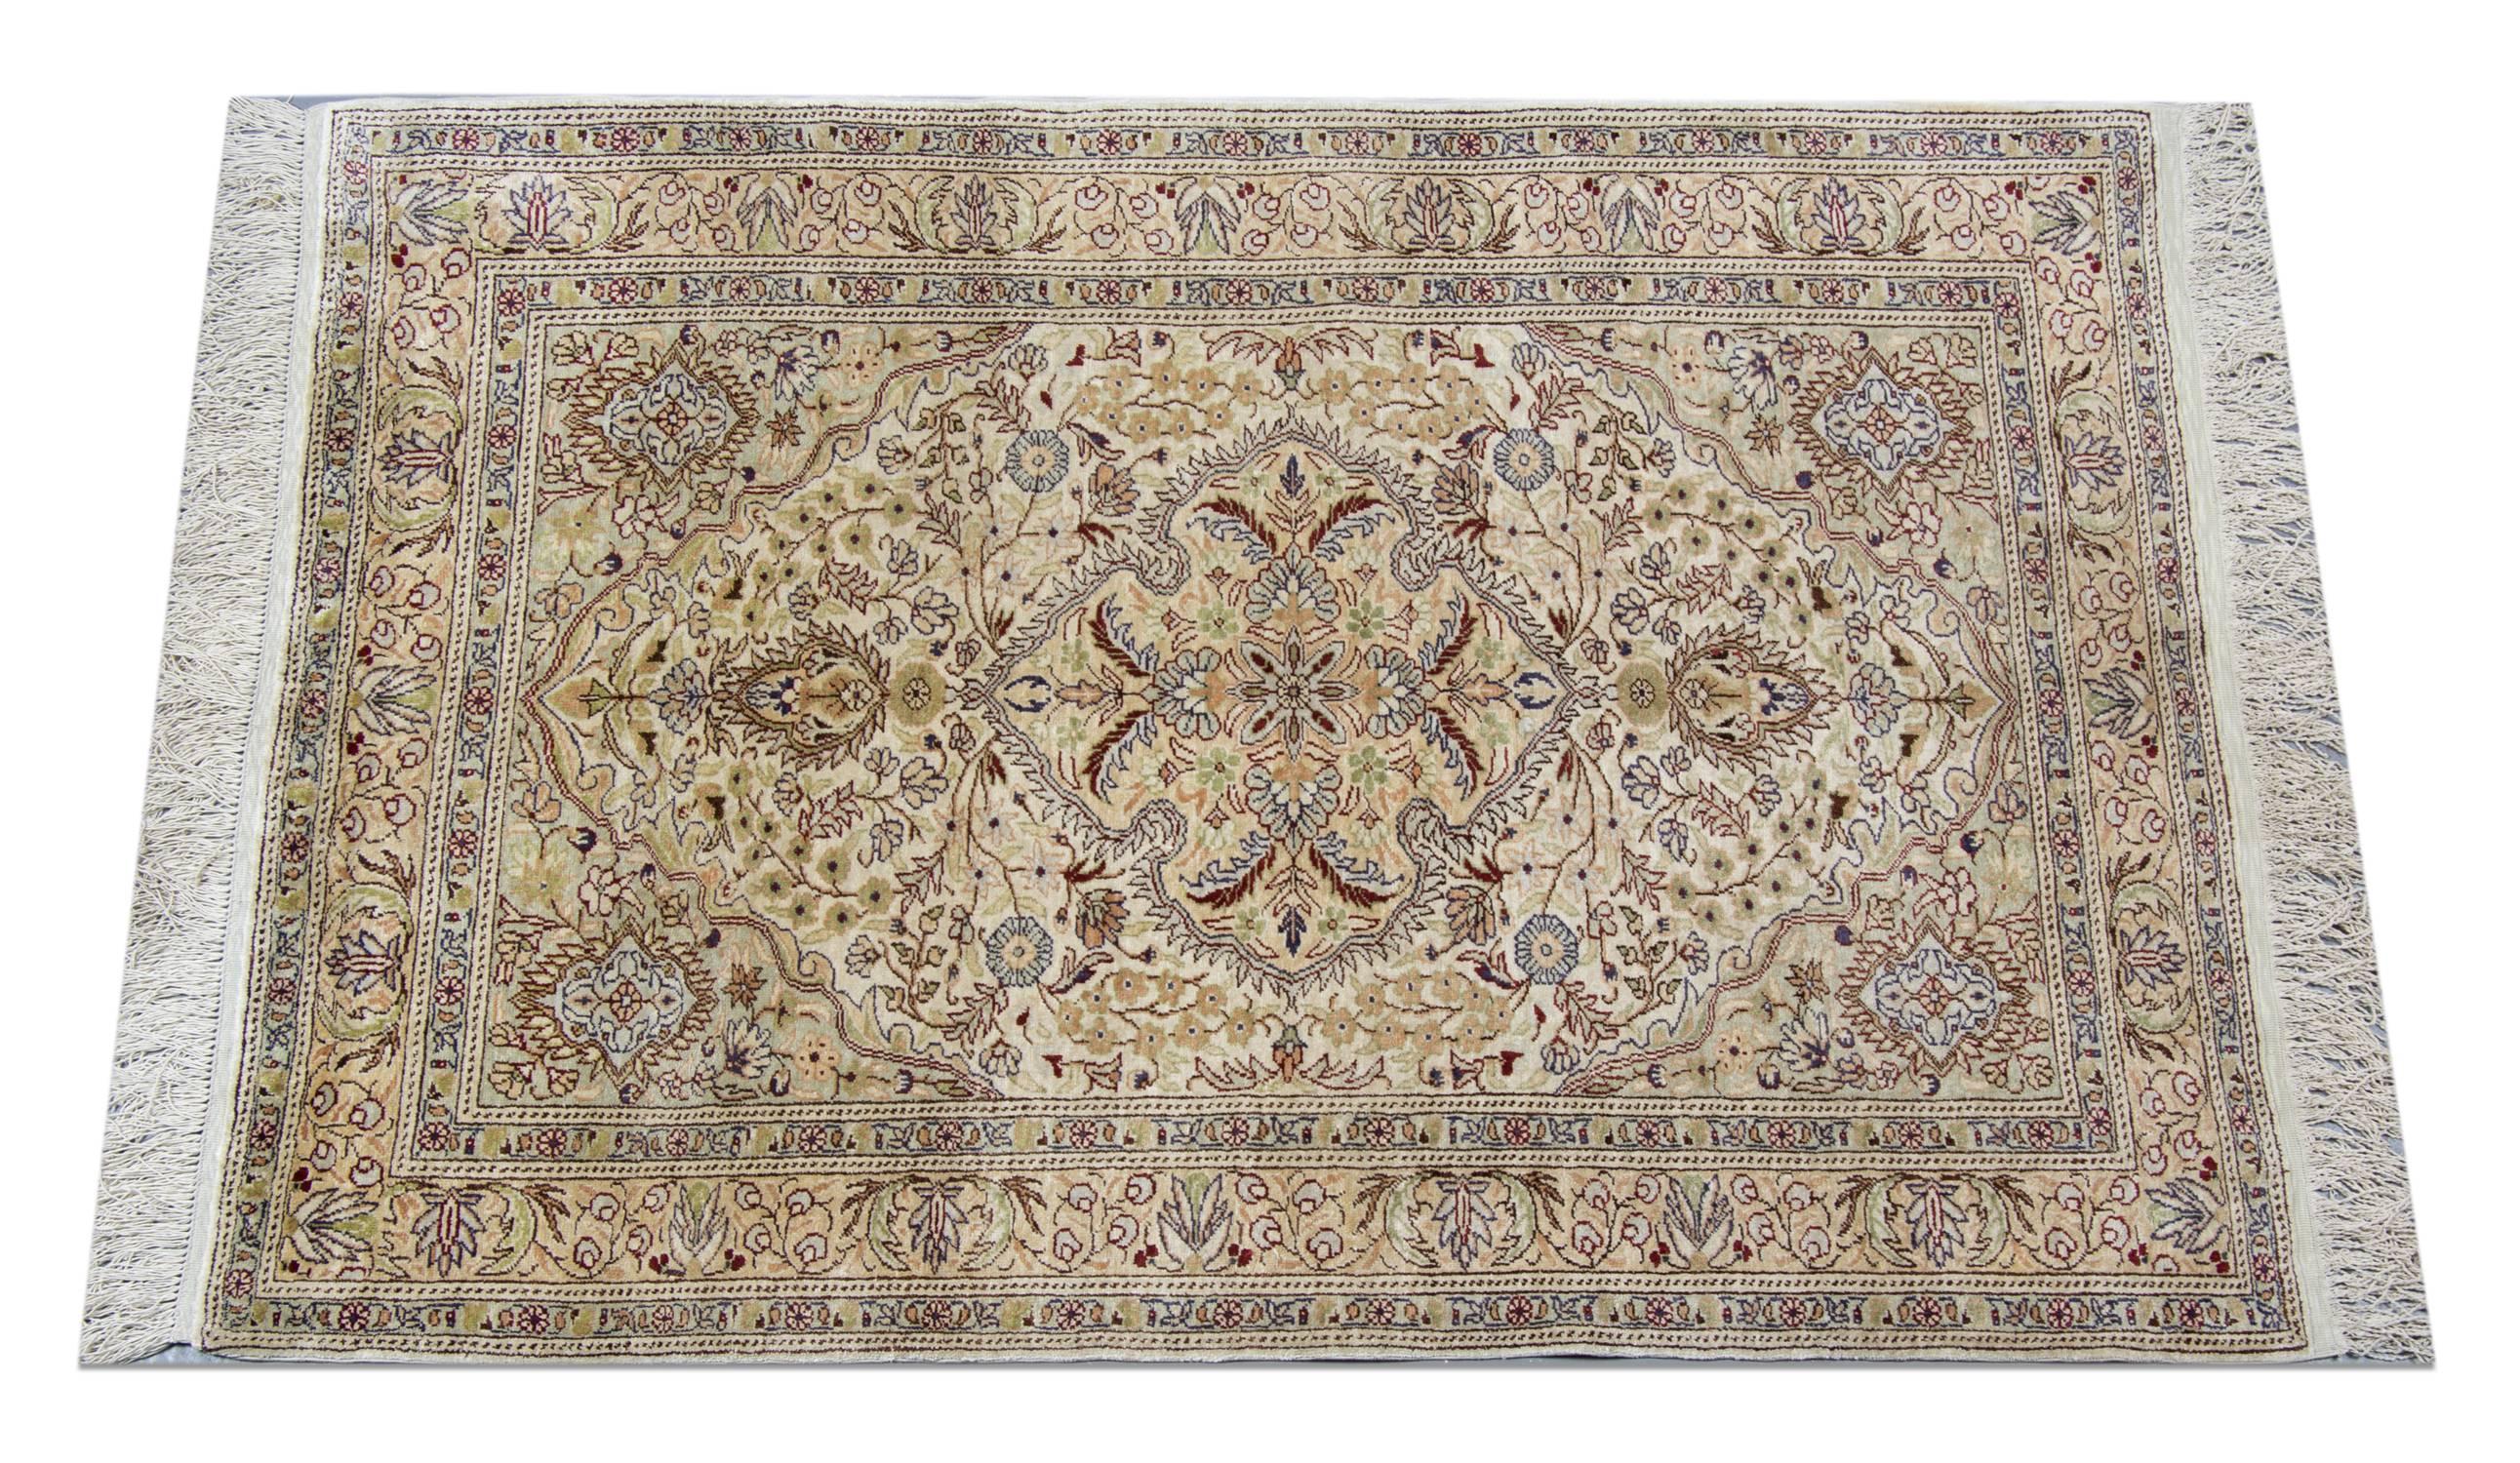 The handmade carpet manufacturing of these masterpieces Turkish rugs began early in the 20th century. The luxury rugs from Kayseri are known for their artistry with the pile of wool or silk. Those carpets and rugs are often manufactured with high